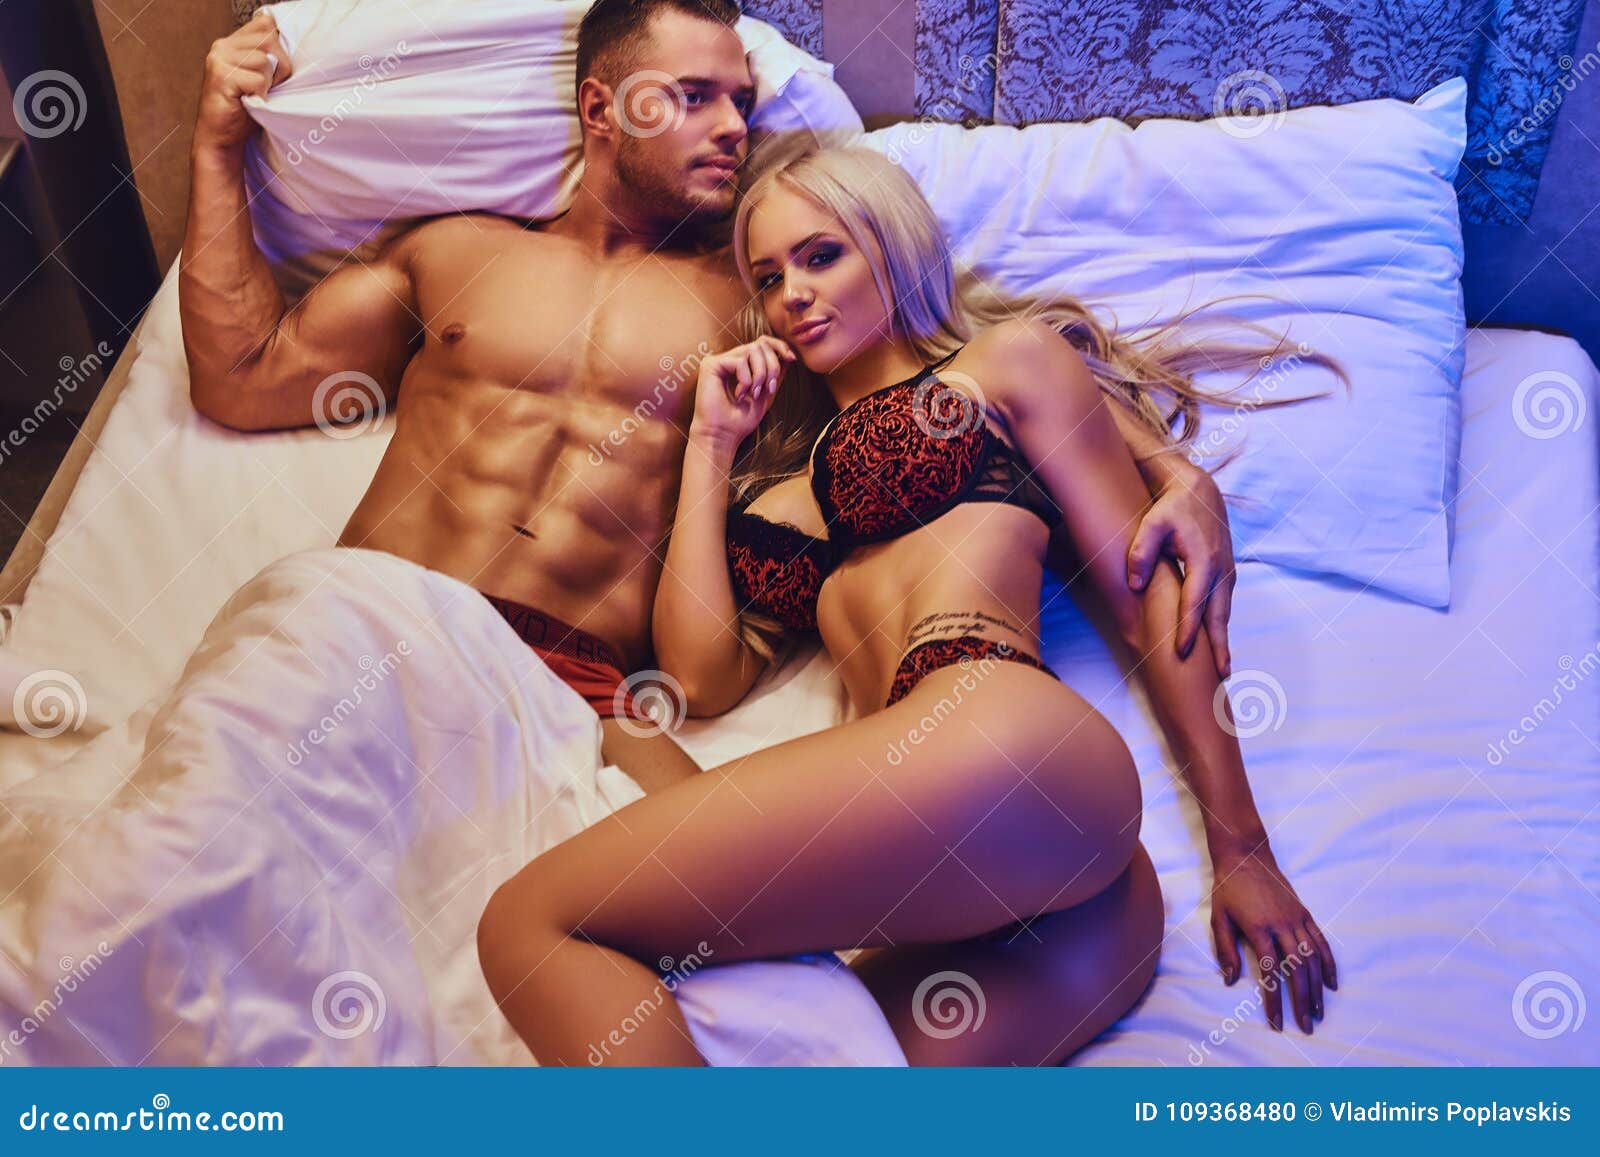 Portrait of Husband and Wife, Relaxing in Bed, Honeymoon image